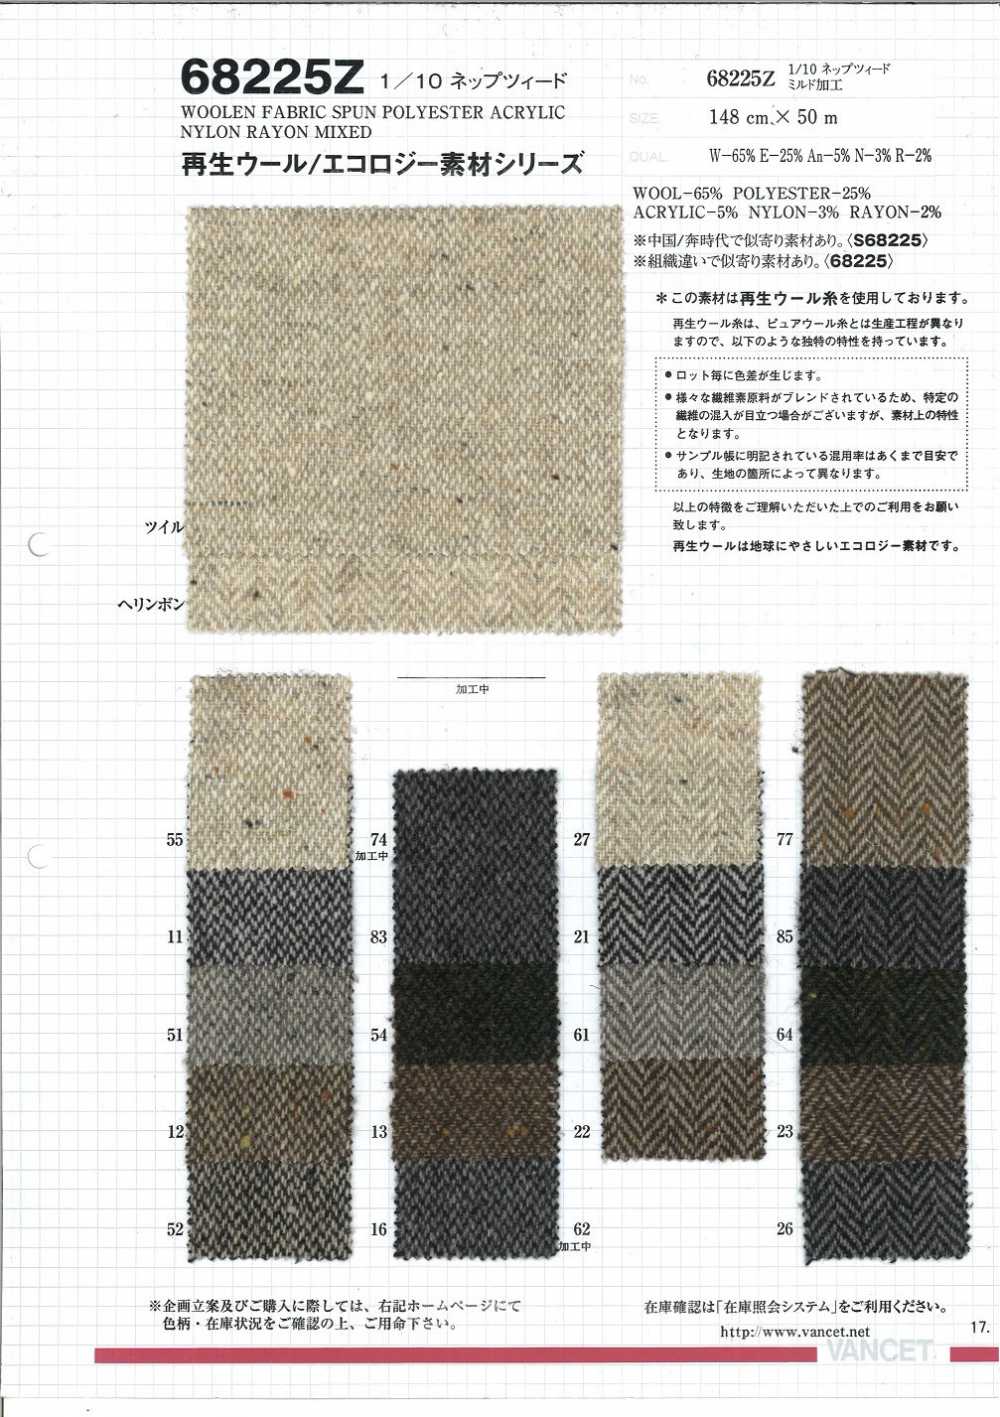 68225Z 1/10 Nep Tweed (2) [Uses Recycled Wool Thread][Textile / Fabric] VANCET